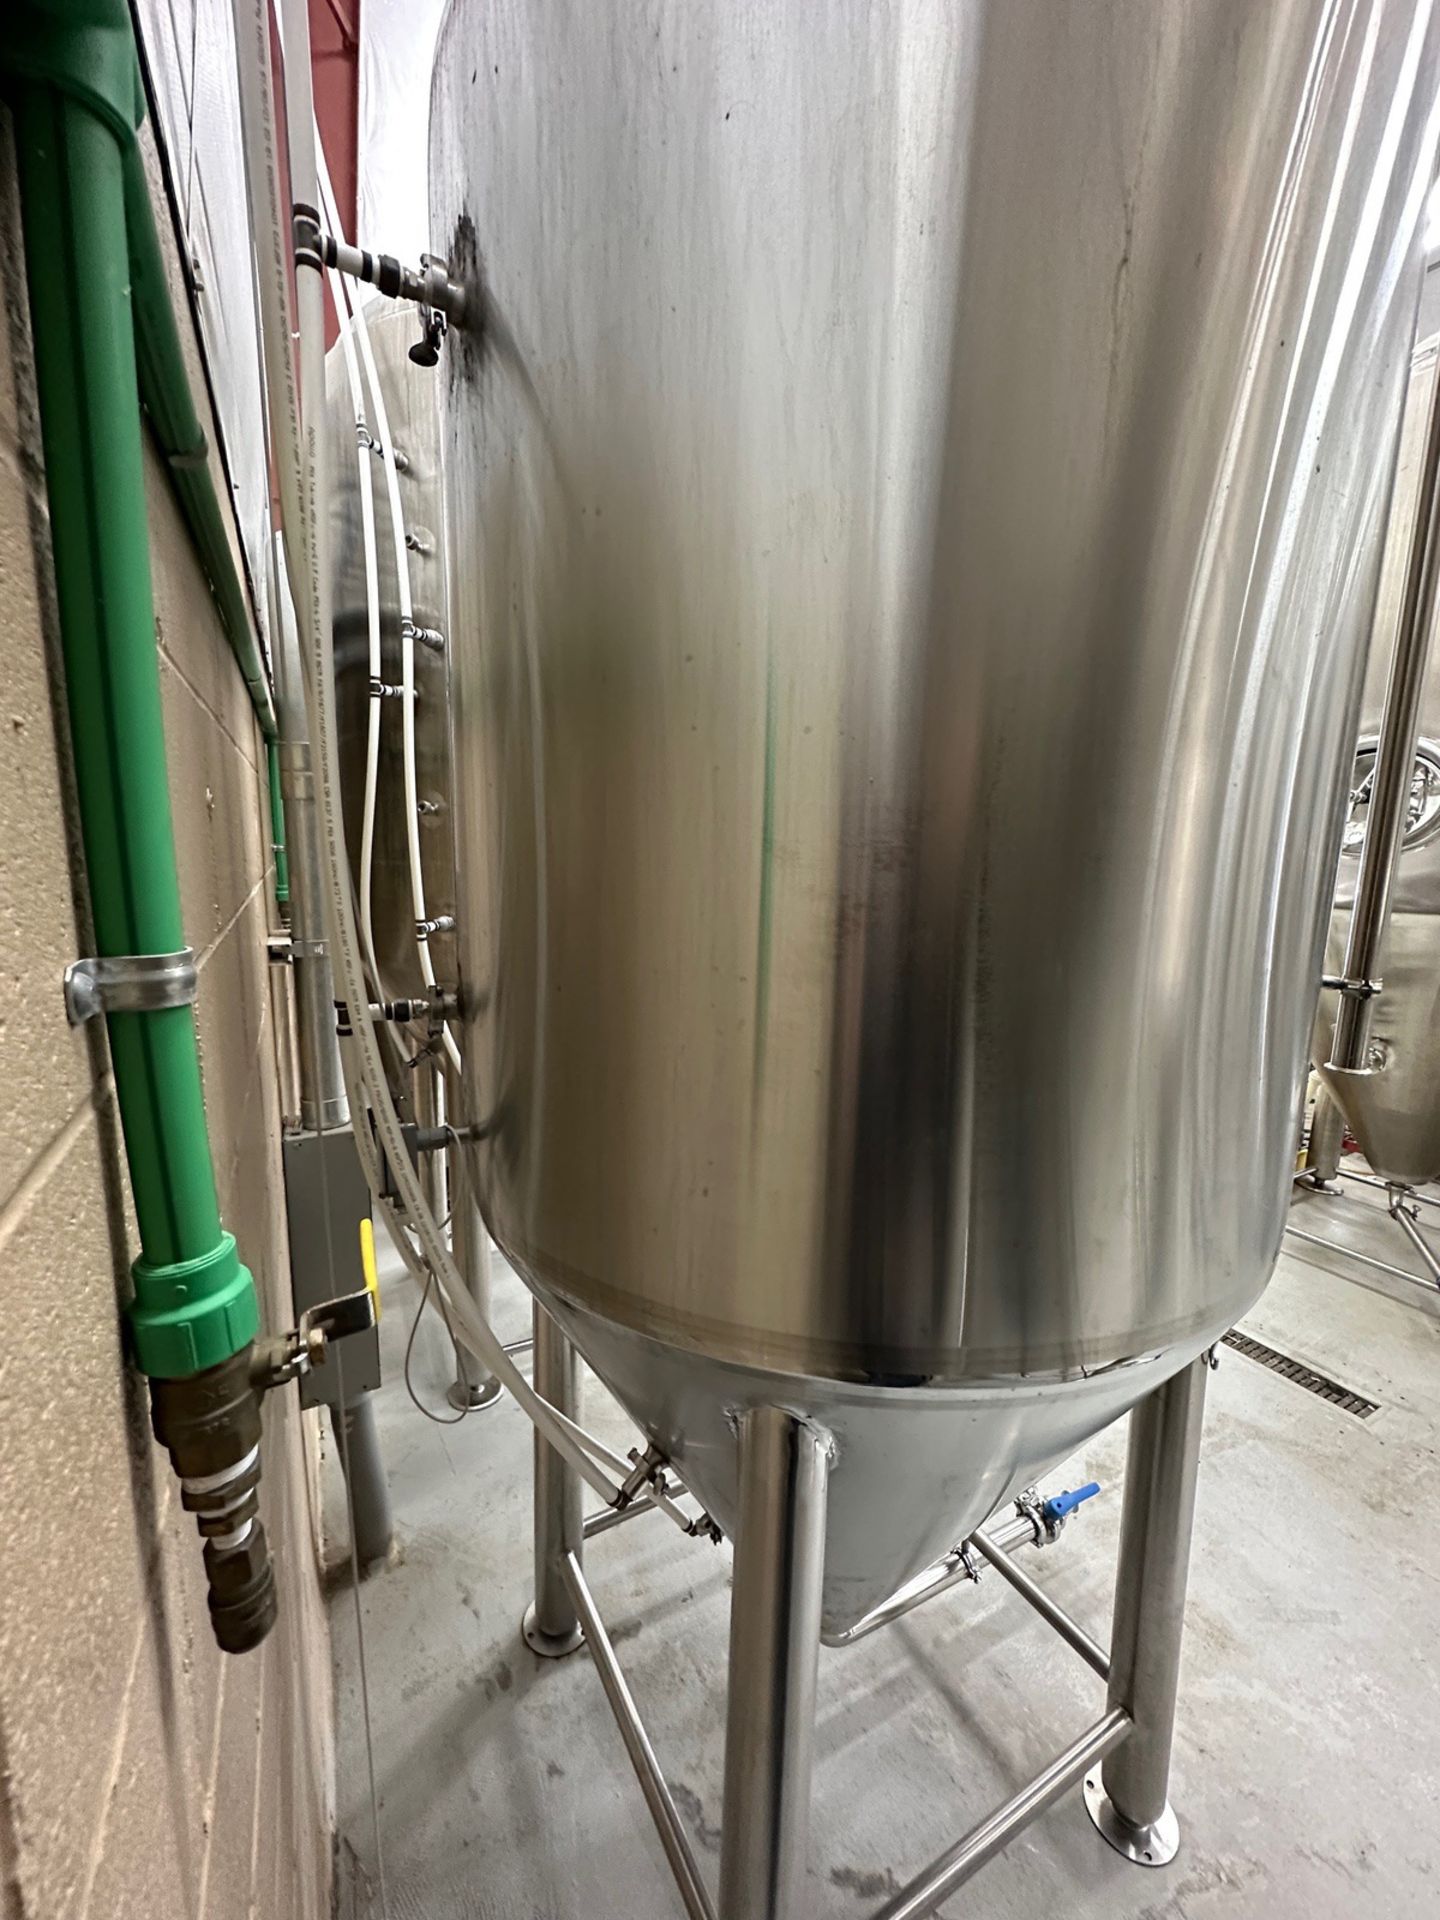 15 BBL Apex Stainless Steel Fermentation Tank - Cone Bottom, Glycol Jacke | Rig Fee $1000 - Image 2 of 4